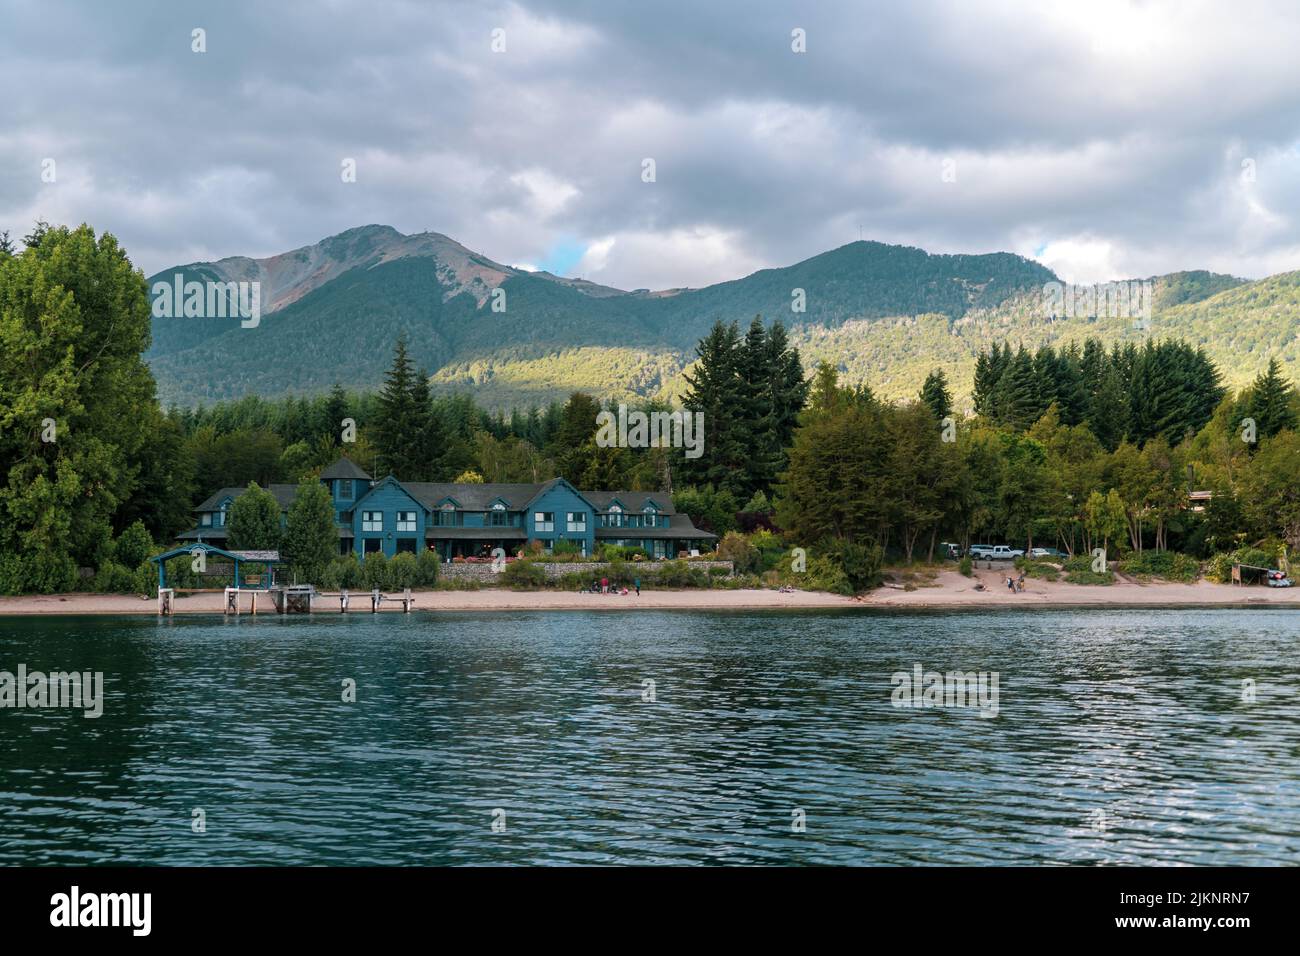 The beautiful summer landscape with a hotel on the lakeside surrounded by green trees against mountains. Stock Photo